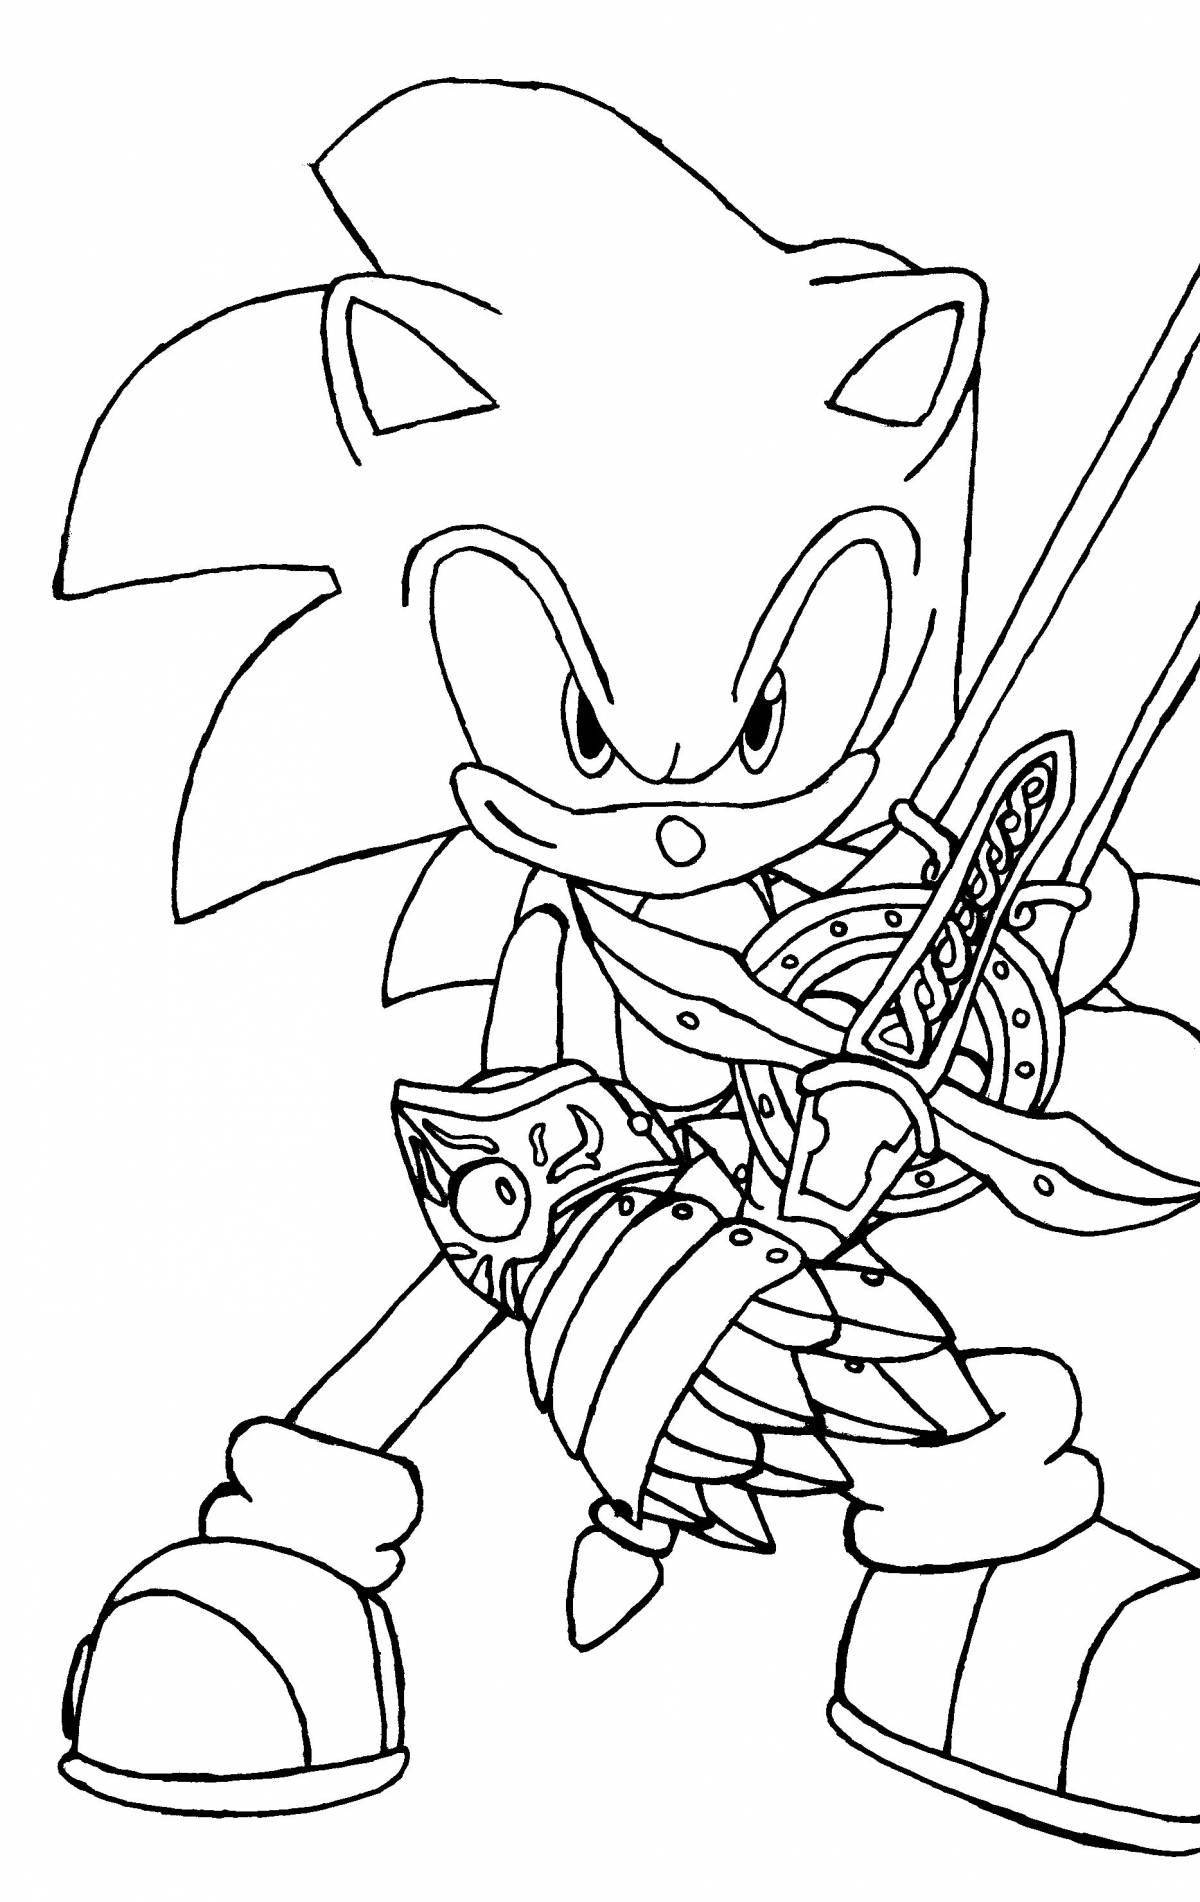 Charming darkspine sonic coloring page